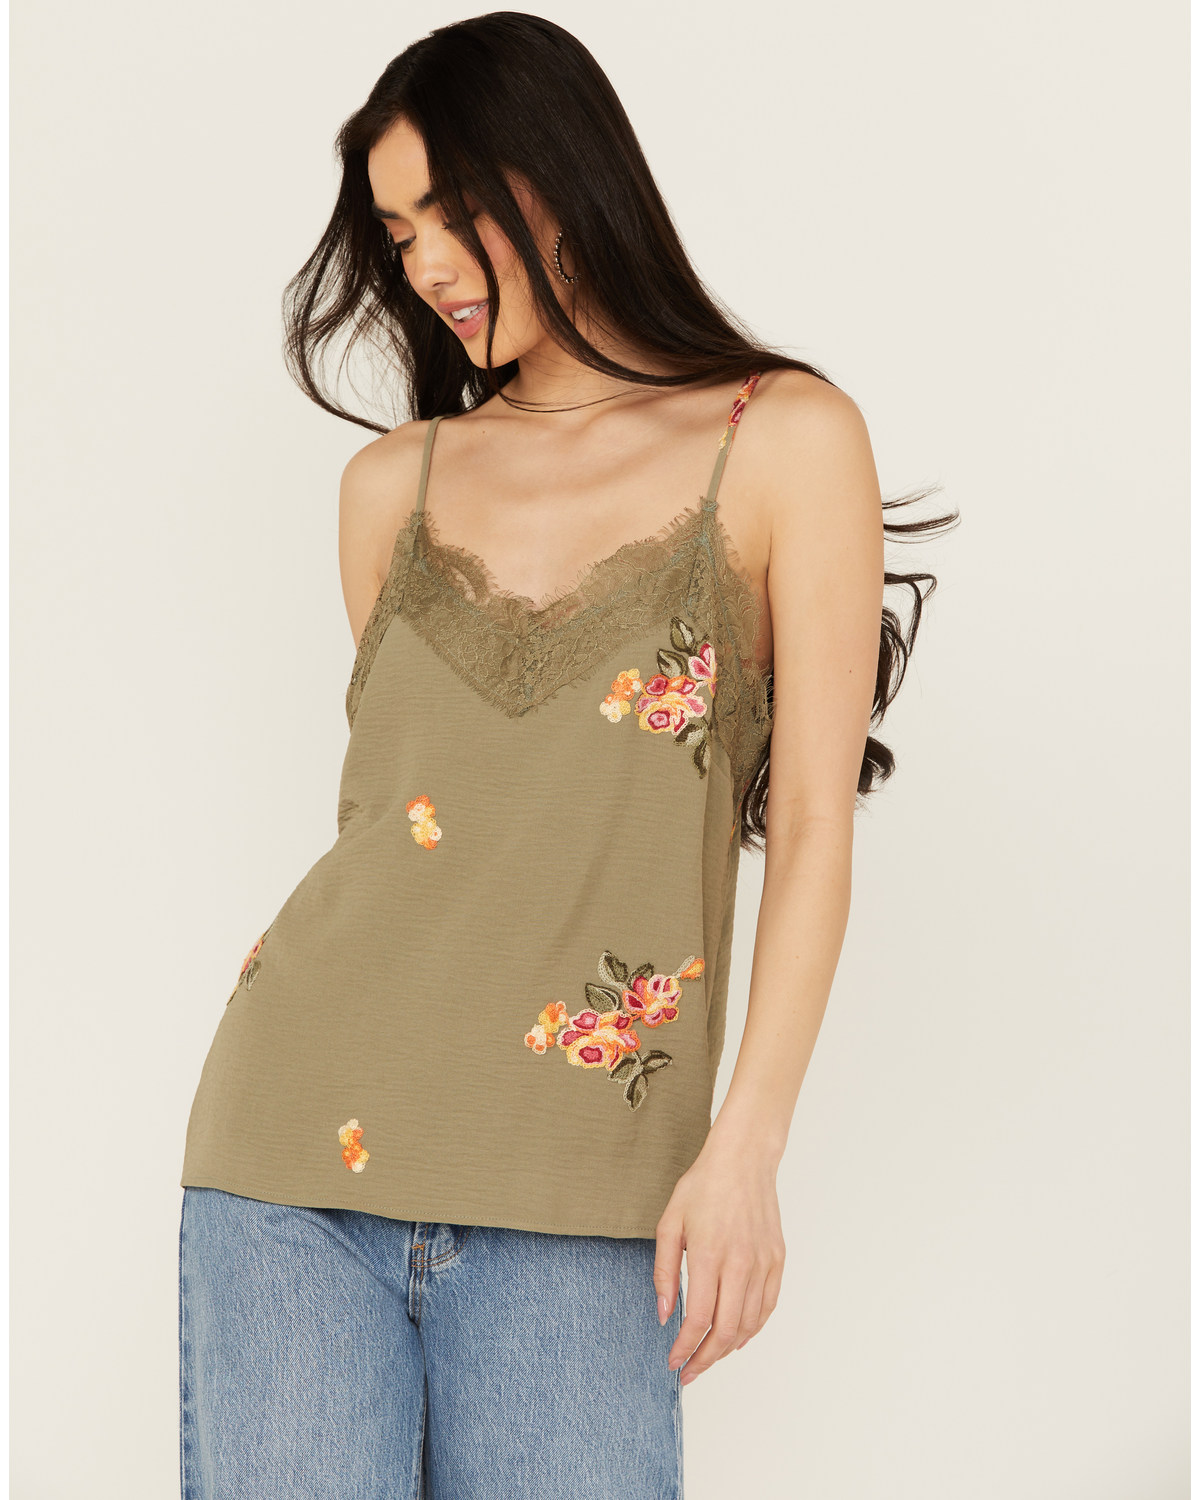 Wild Moss Women's Embroidered Cami